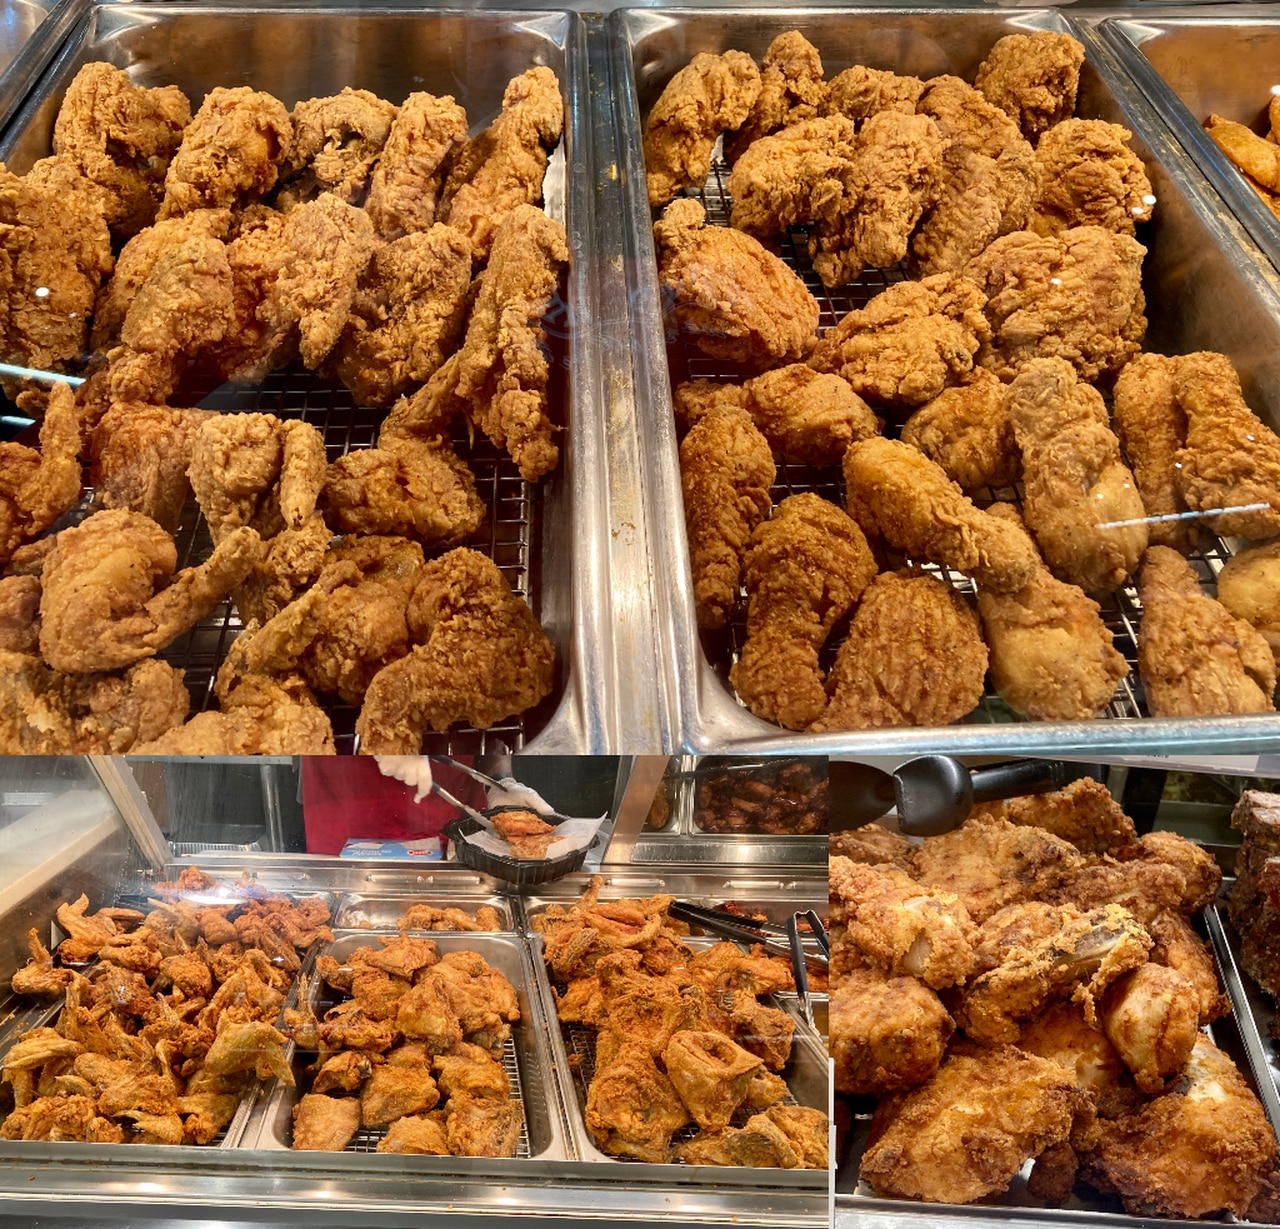 My Trip To A Fried Chicken Outlet In Memphis